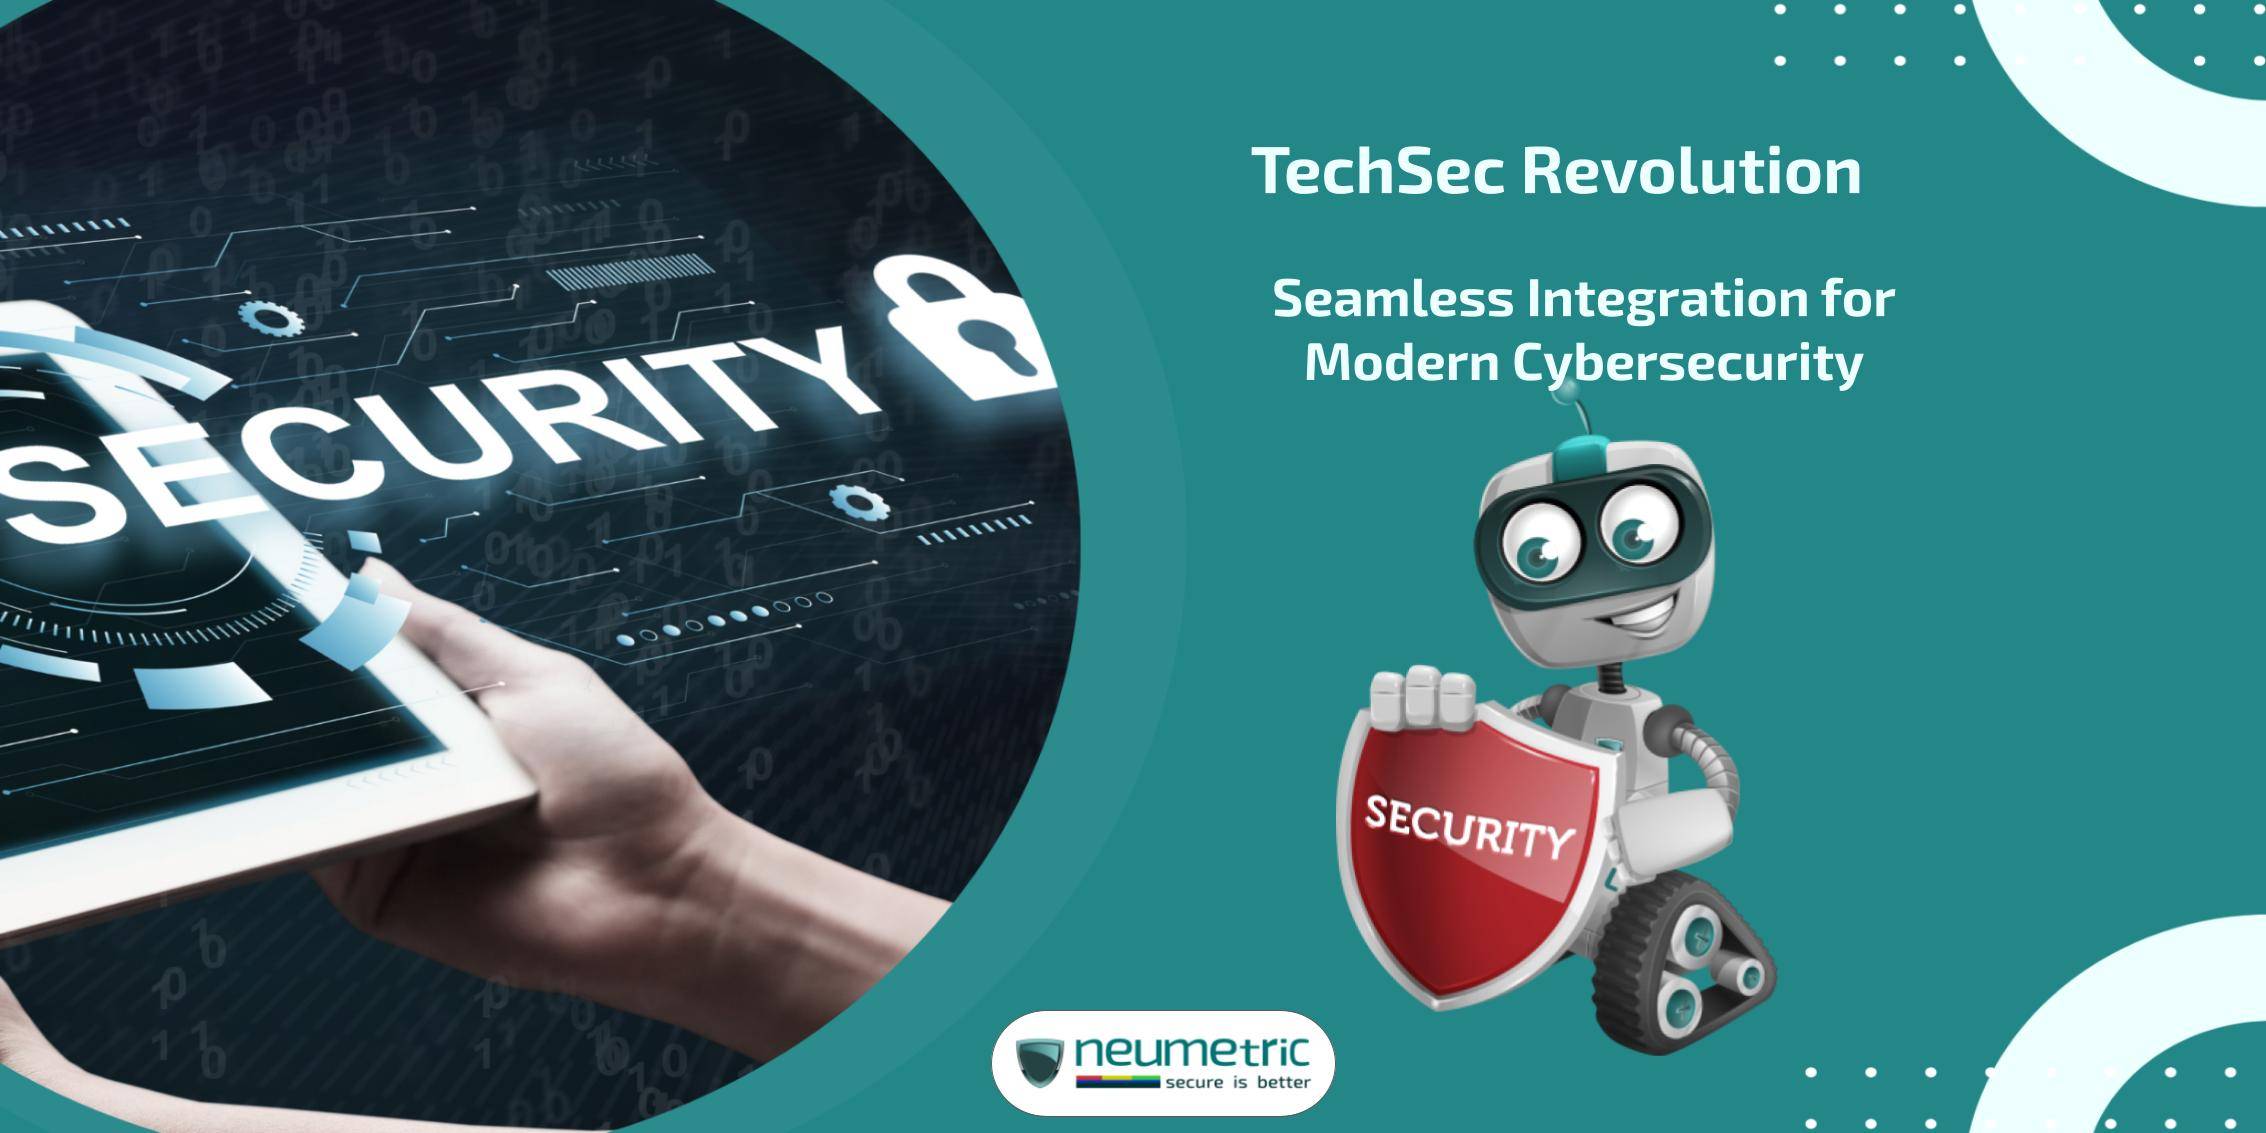 TechSec Revolution: Seamless Integration for Modern Cybersecurity